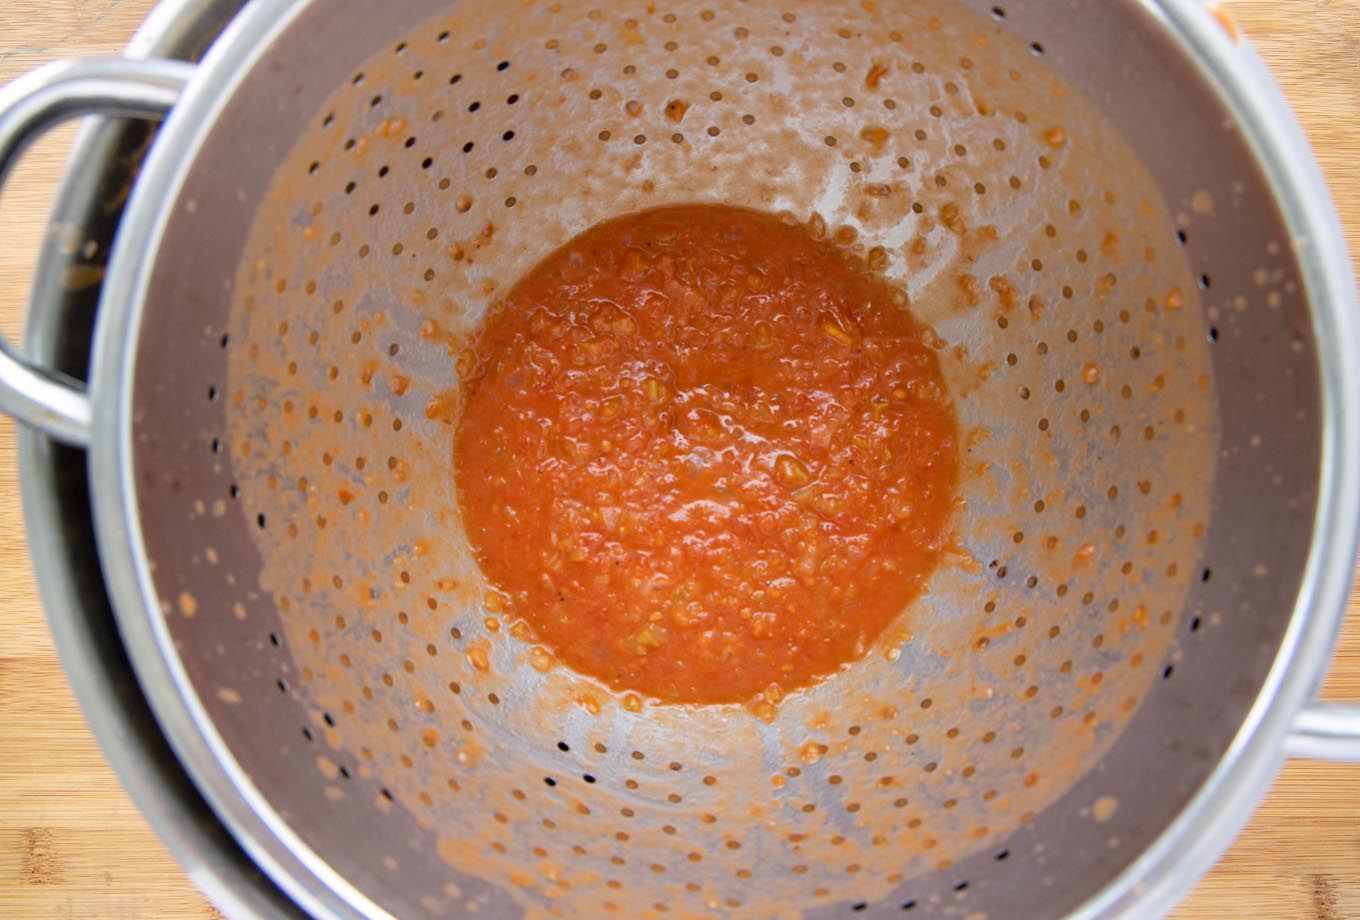 strainer holding bits of celery, onion and tomato that weren't pureed.